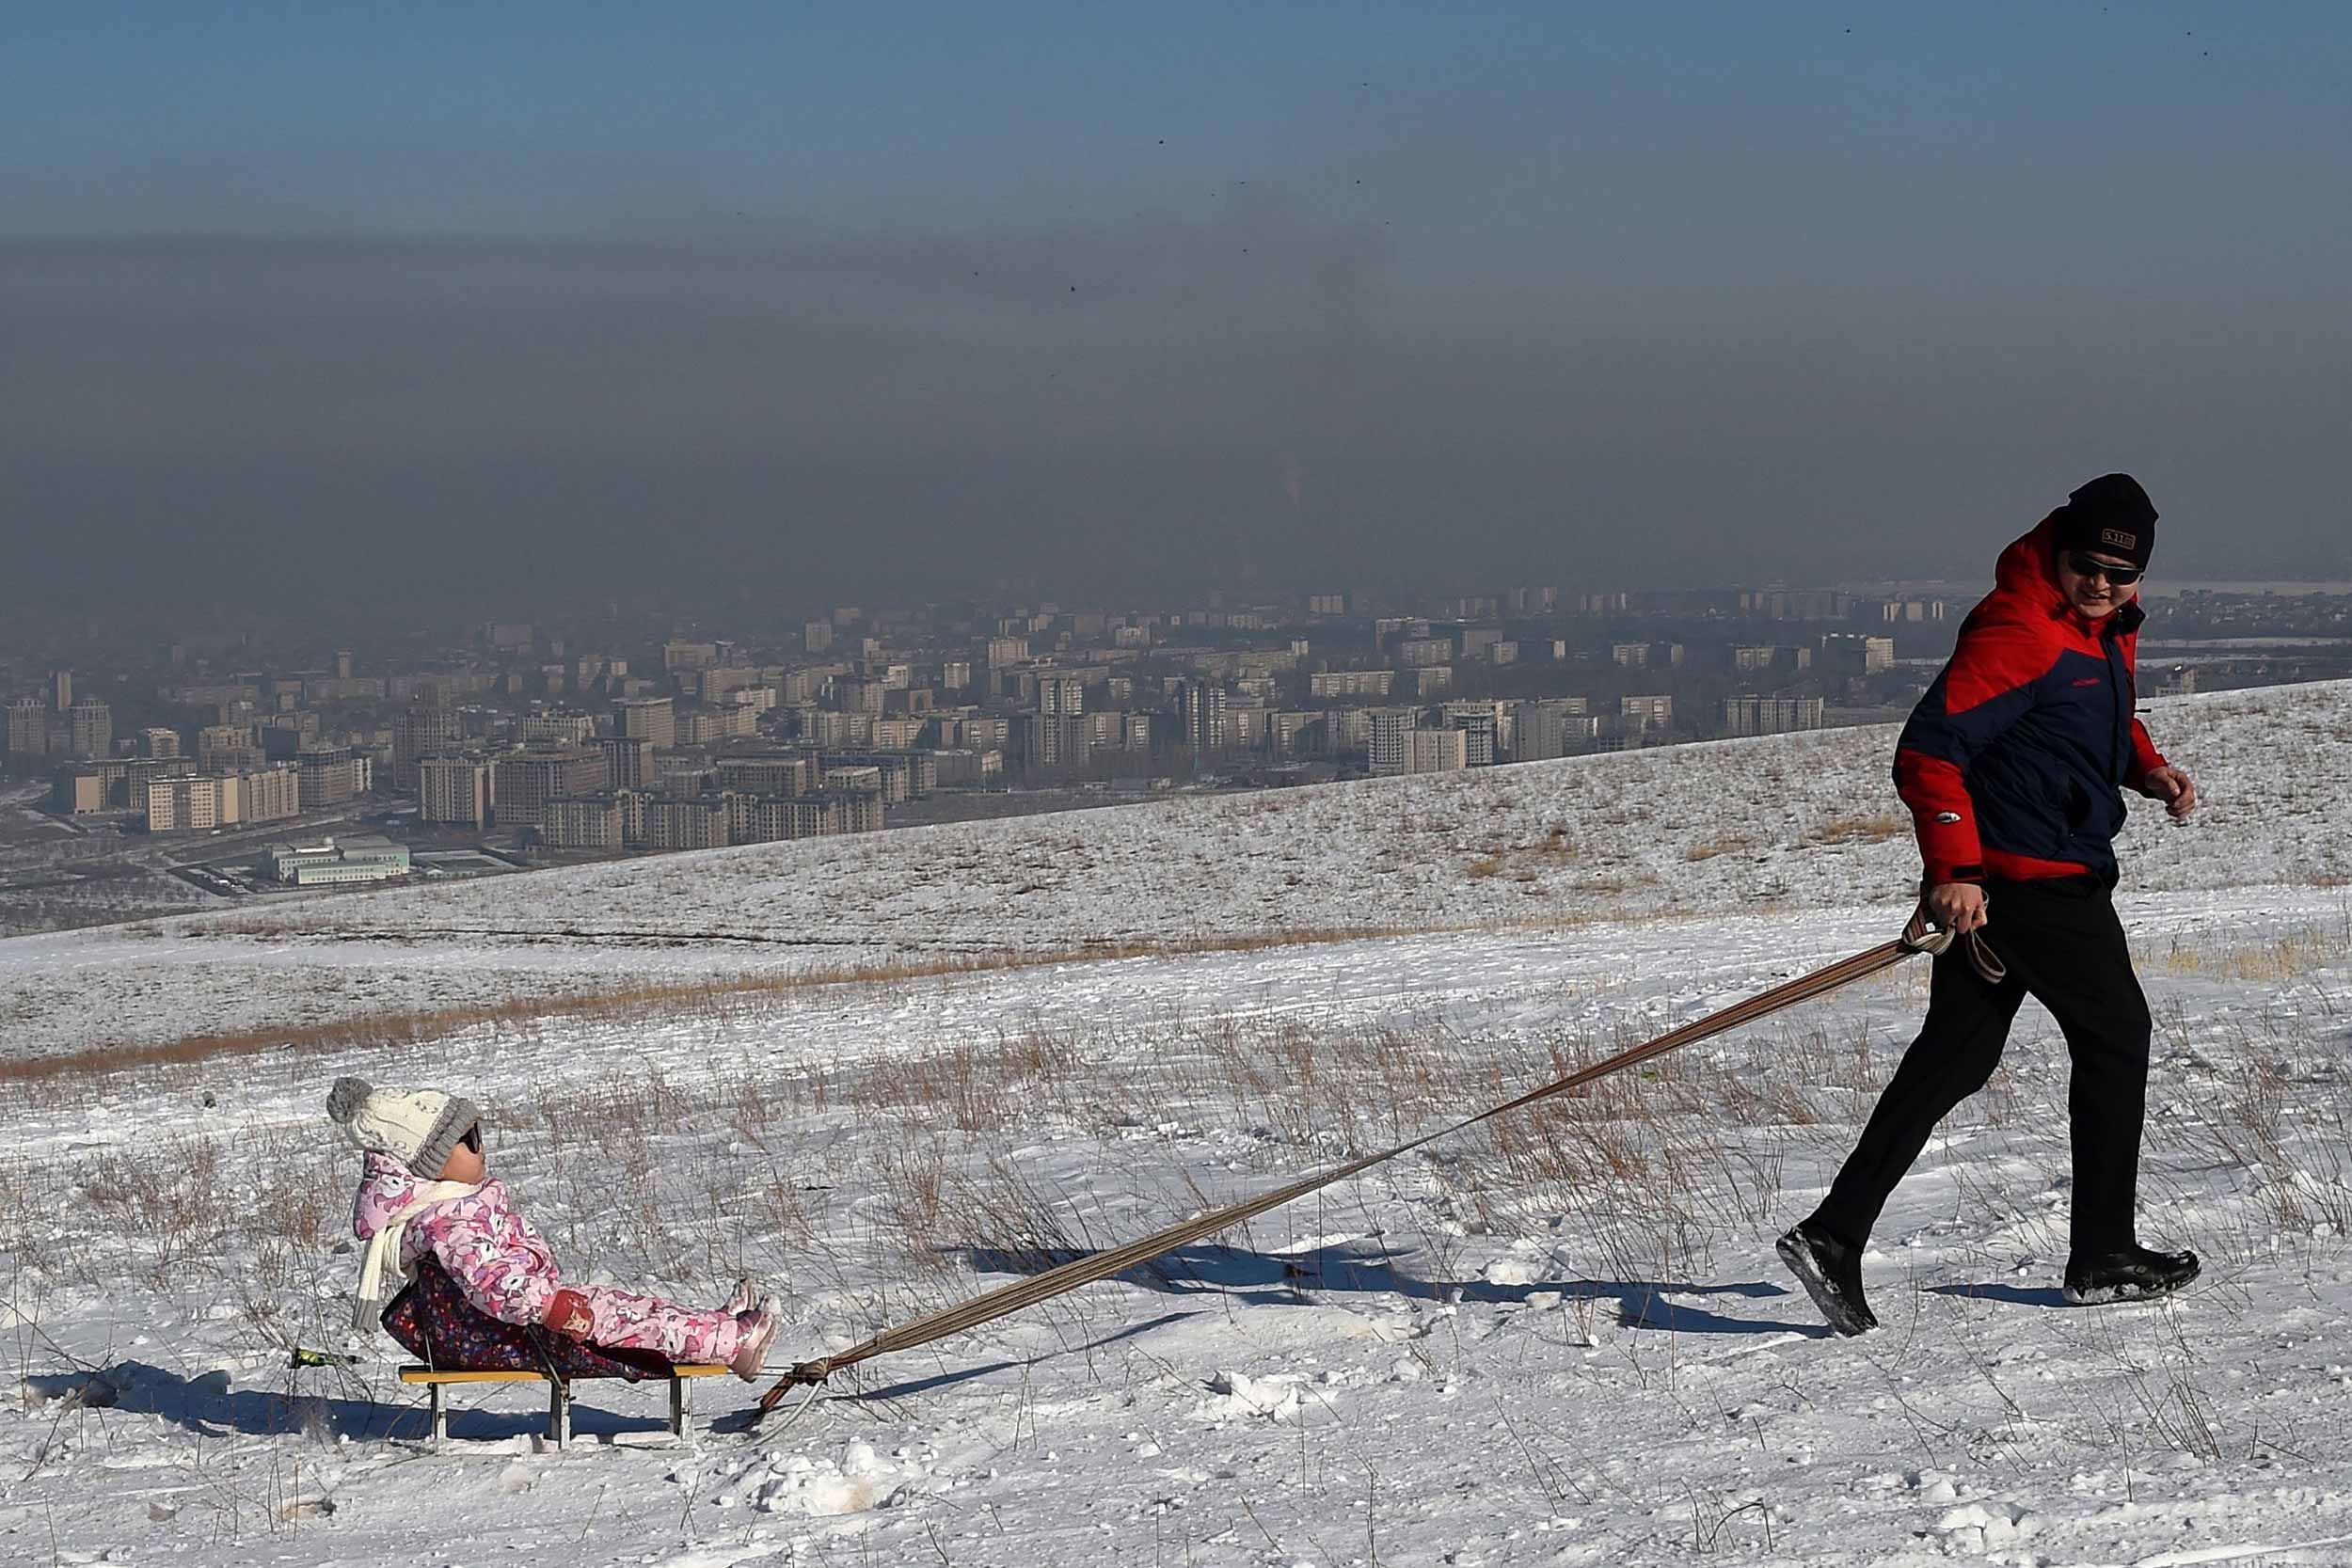 A man pulls a child on a sled on a hilltop as smog covers the Kyrgyz capital of Bishkek on January 29, 2020. © VYACHESLAV OSELEDKO/AFP via Getty Images